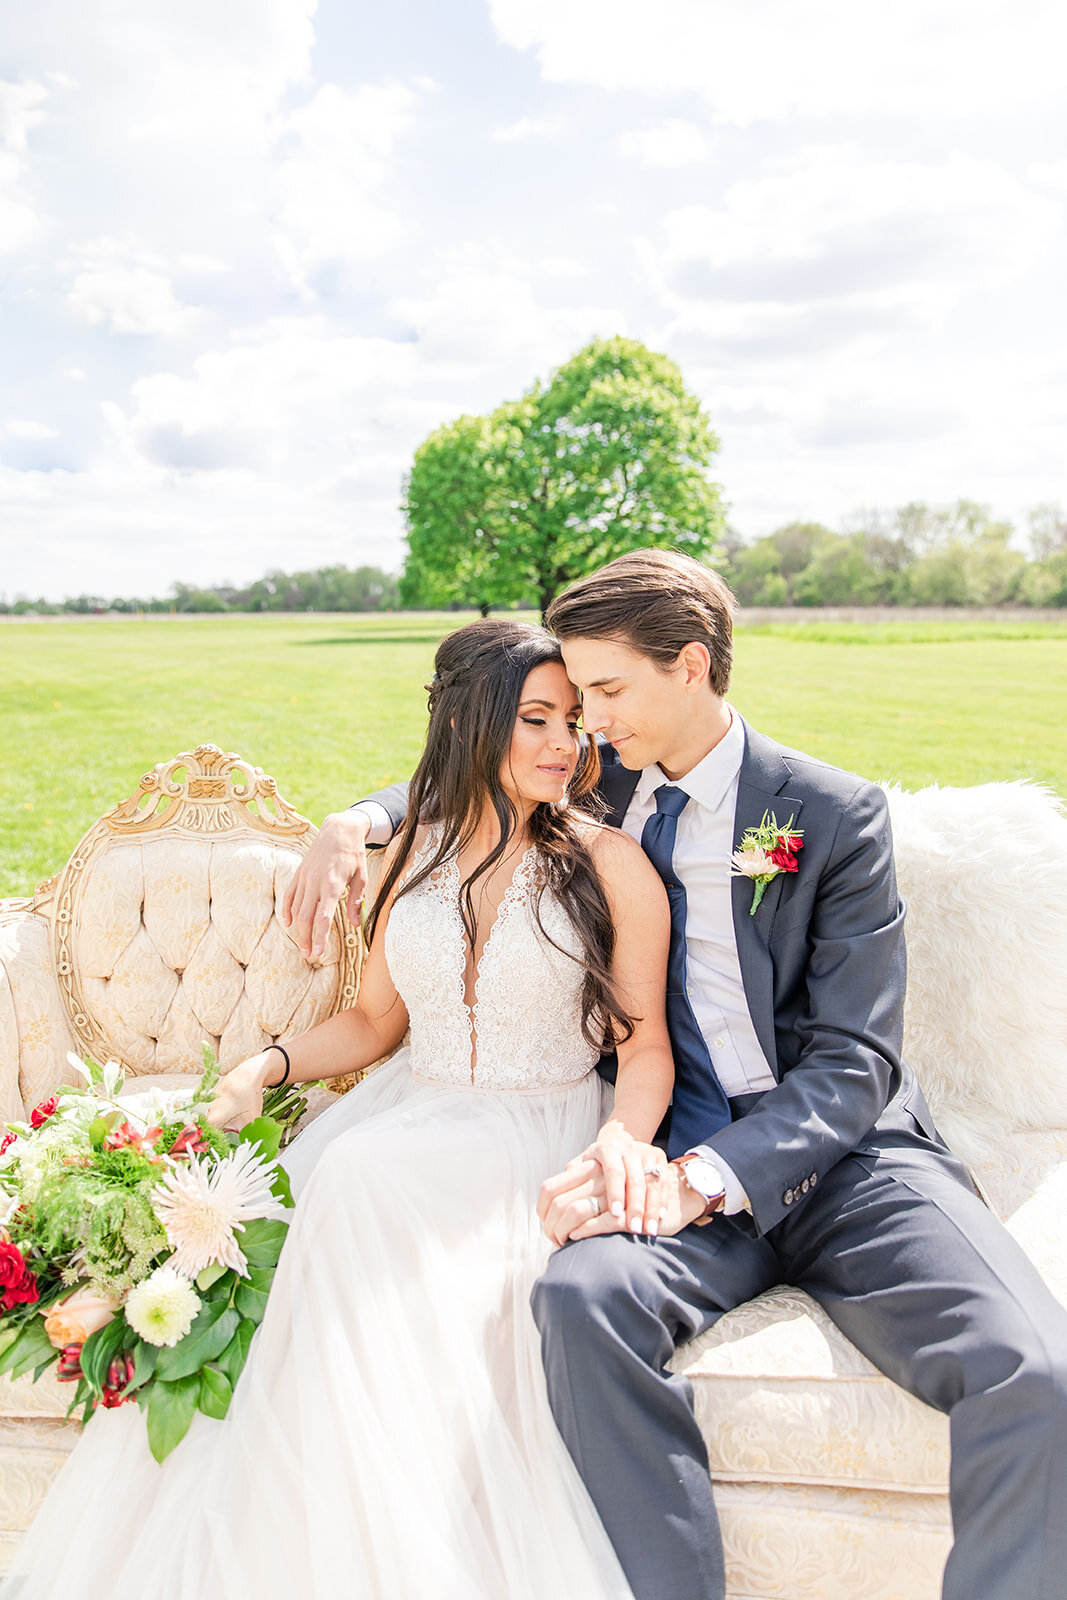 Vibrant Spring Vintage and Nature Inspired St. Charles Styled Shoot | CHI thee WED